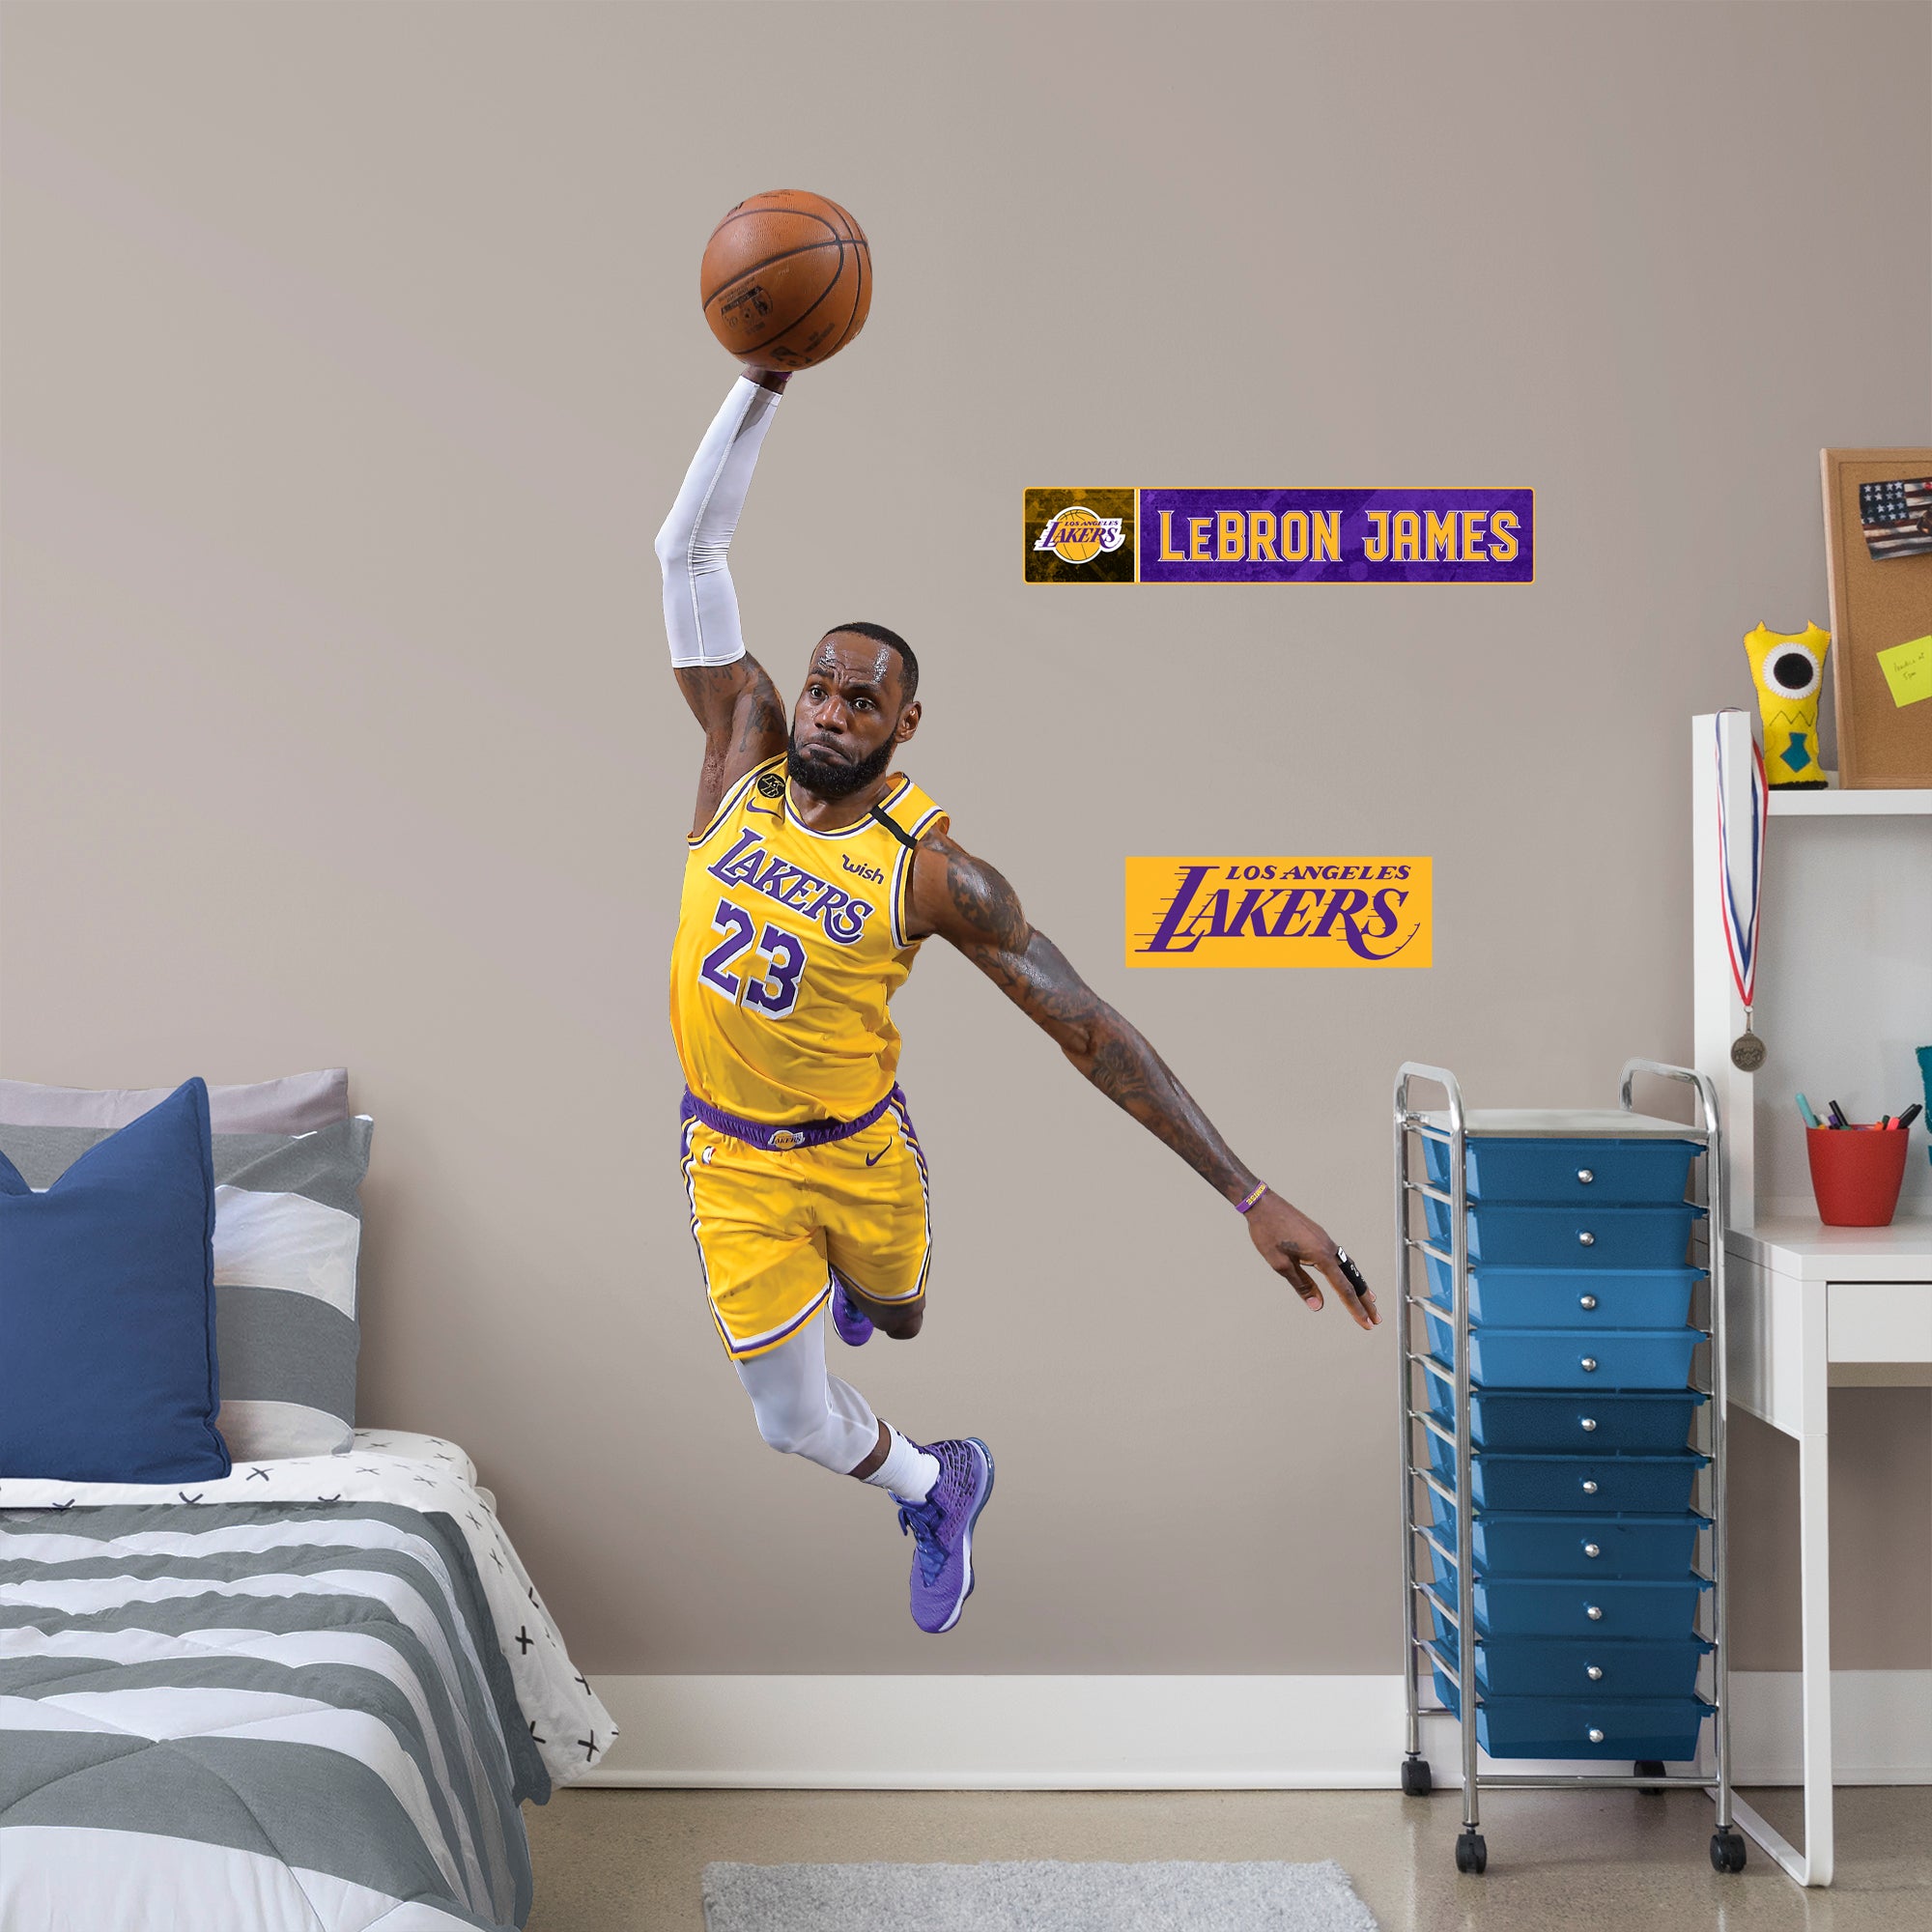 LeBron James for Los Angeles Lakers: Dunk - Officially Licensed NBA Removable Wall Decal Life-Size Athlete + 2 Decals by Fathead